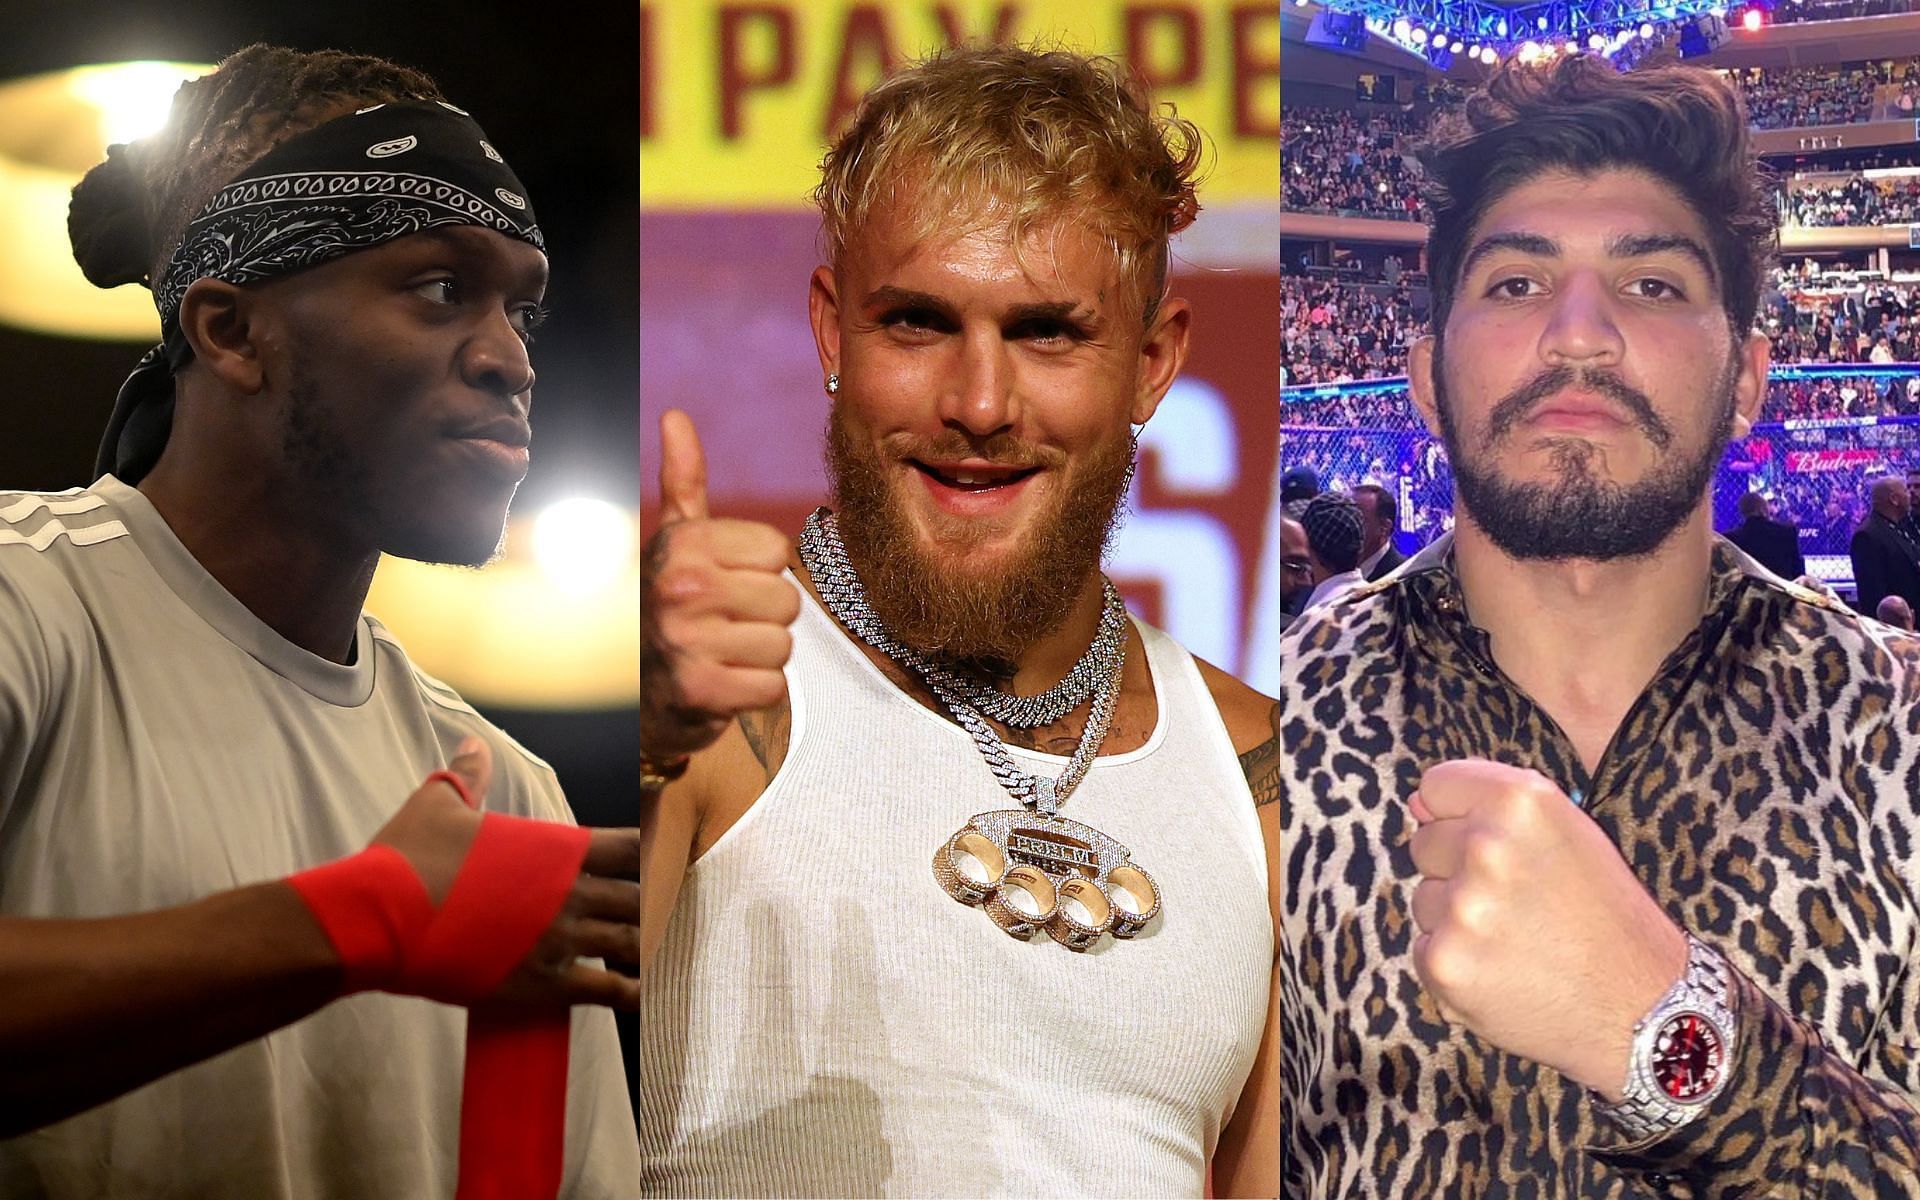 KSI (Left); Jake Paul (Middle); Dillon Danis (Right) [Image courtesy: left and middle images via Getty Images; right image via @dillondanis Instagram]